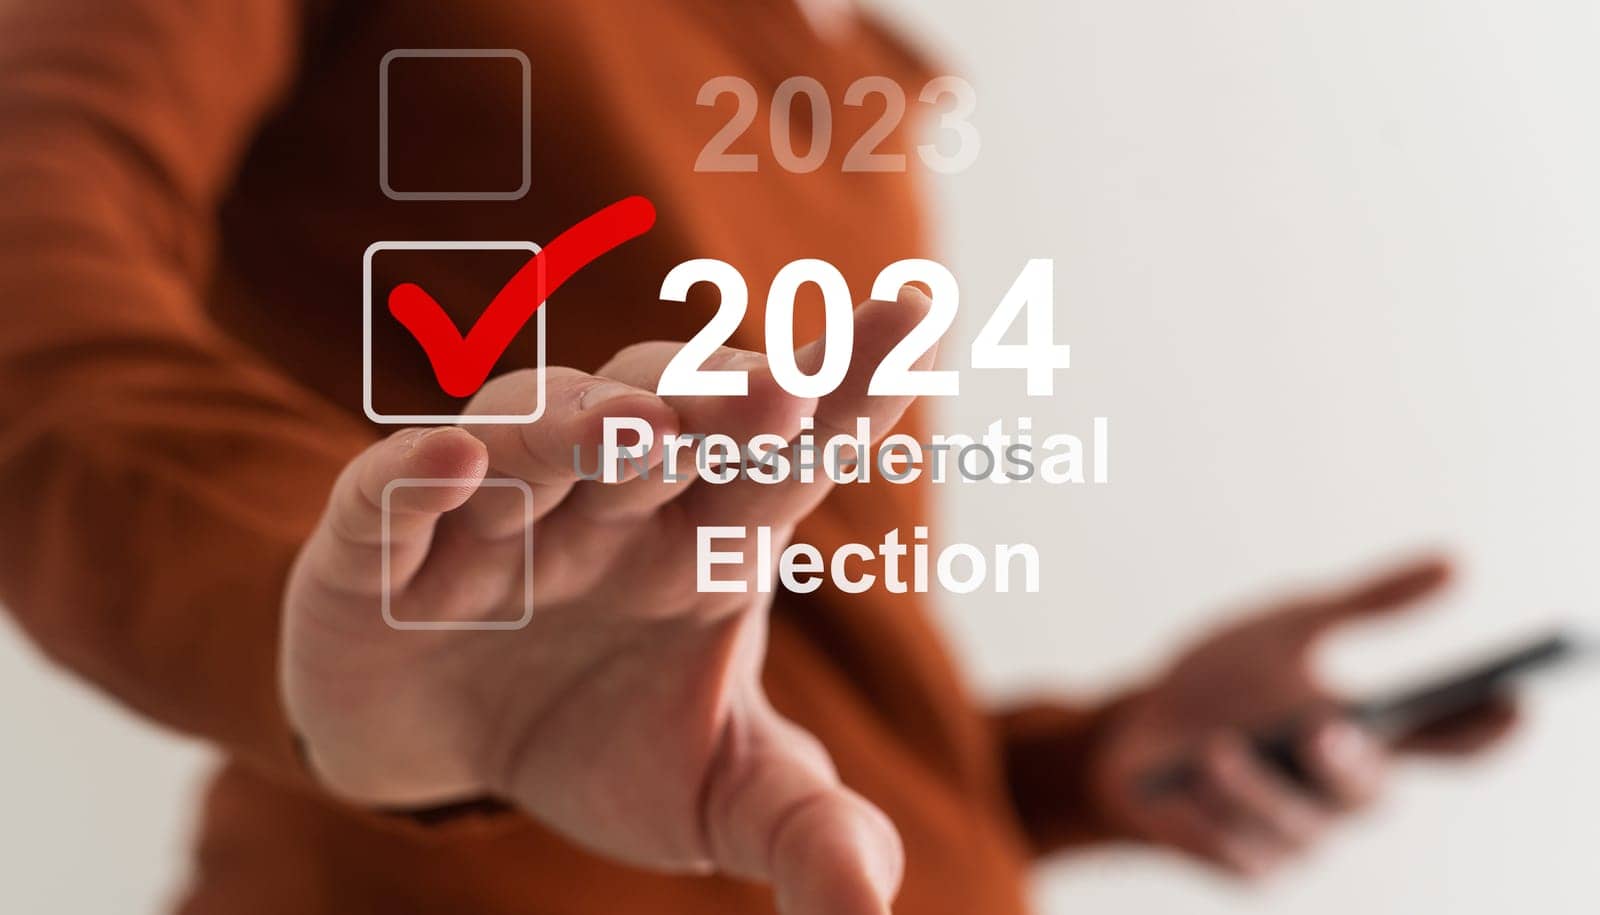 Businessman pressing an Election 2024 concept button. High quality photo